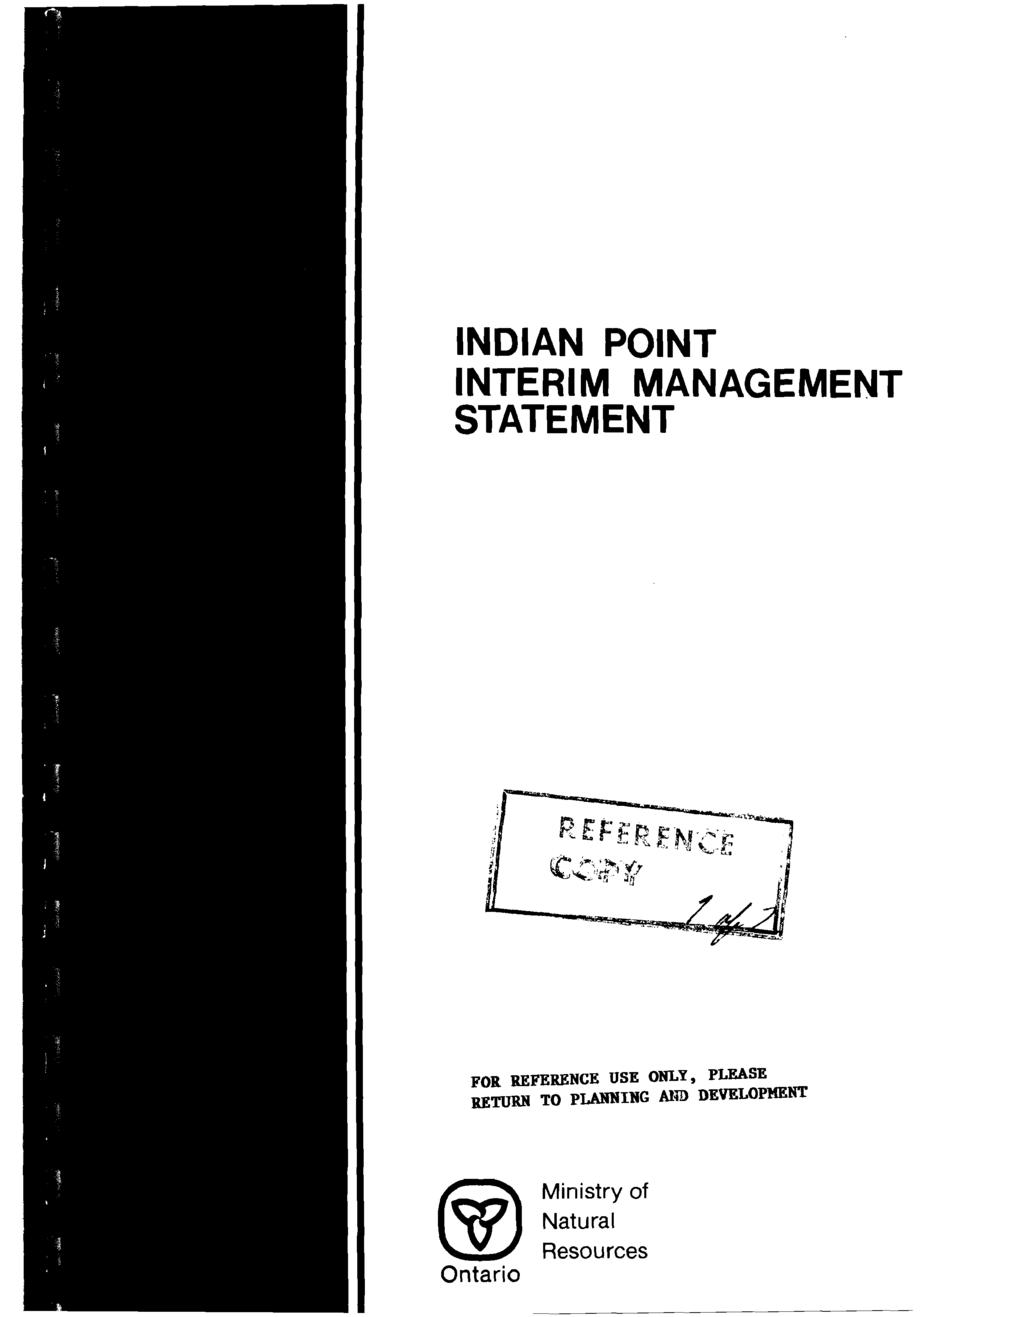 INDIAN POINT INTERIM MANAGEMENT STATEMENT FOR REFERENCE USE ONLY, PLEASE